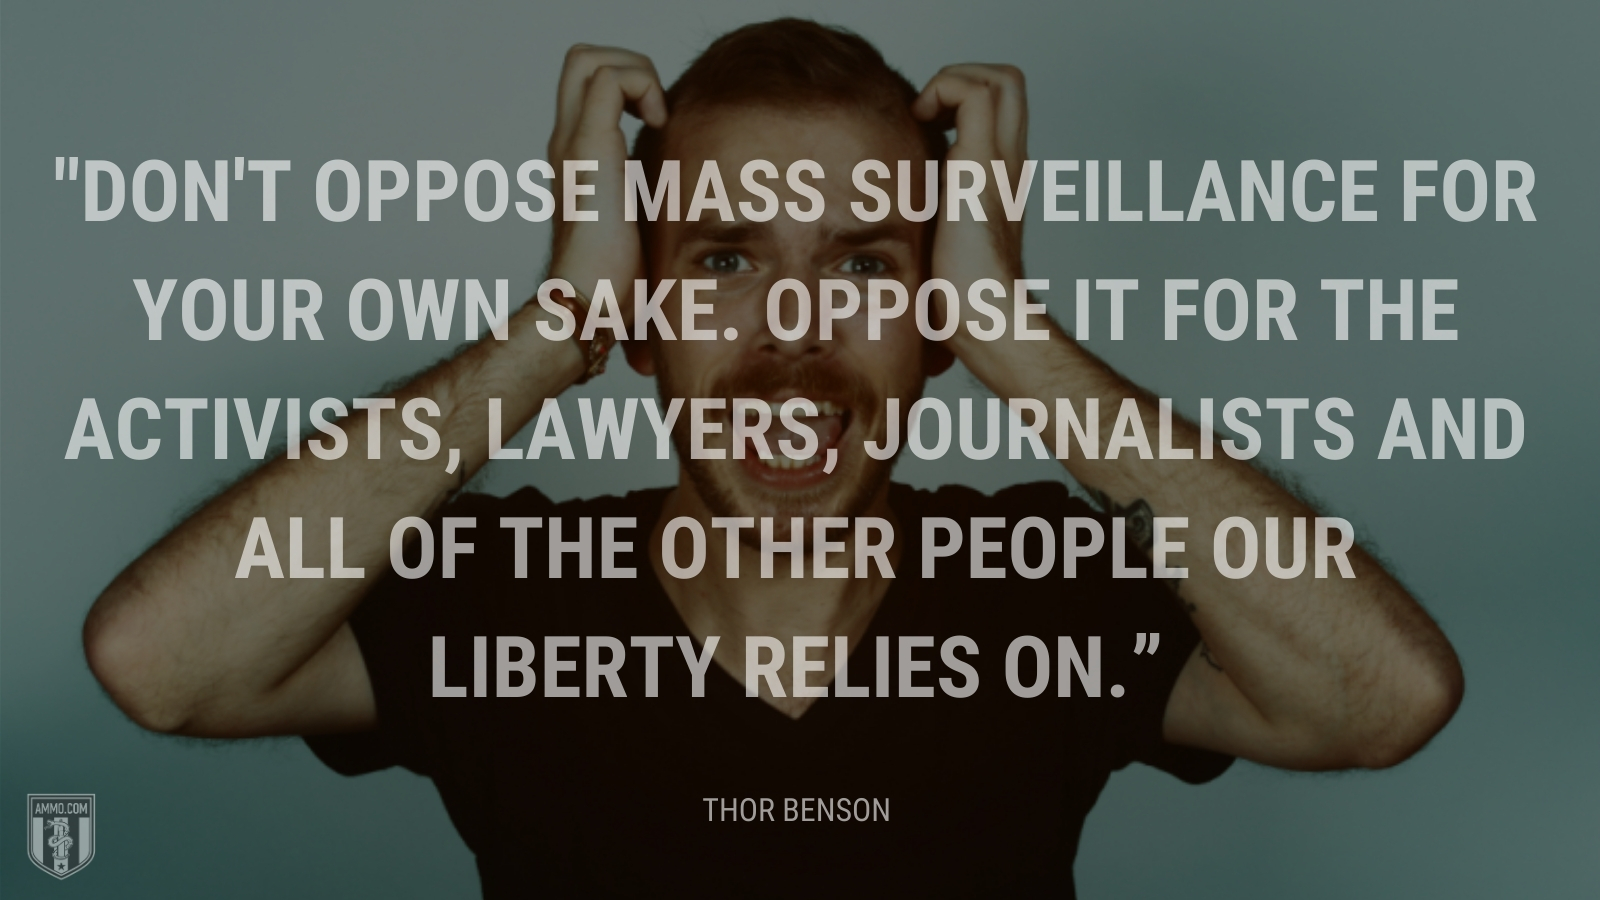 “Don't oppose mass surveillance for your own sake. Oppose it for the activists, lawyers, journalists and all of the other people our liberty relies on.” - Thor Benson